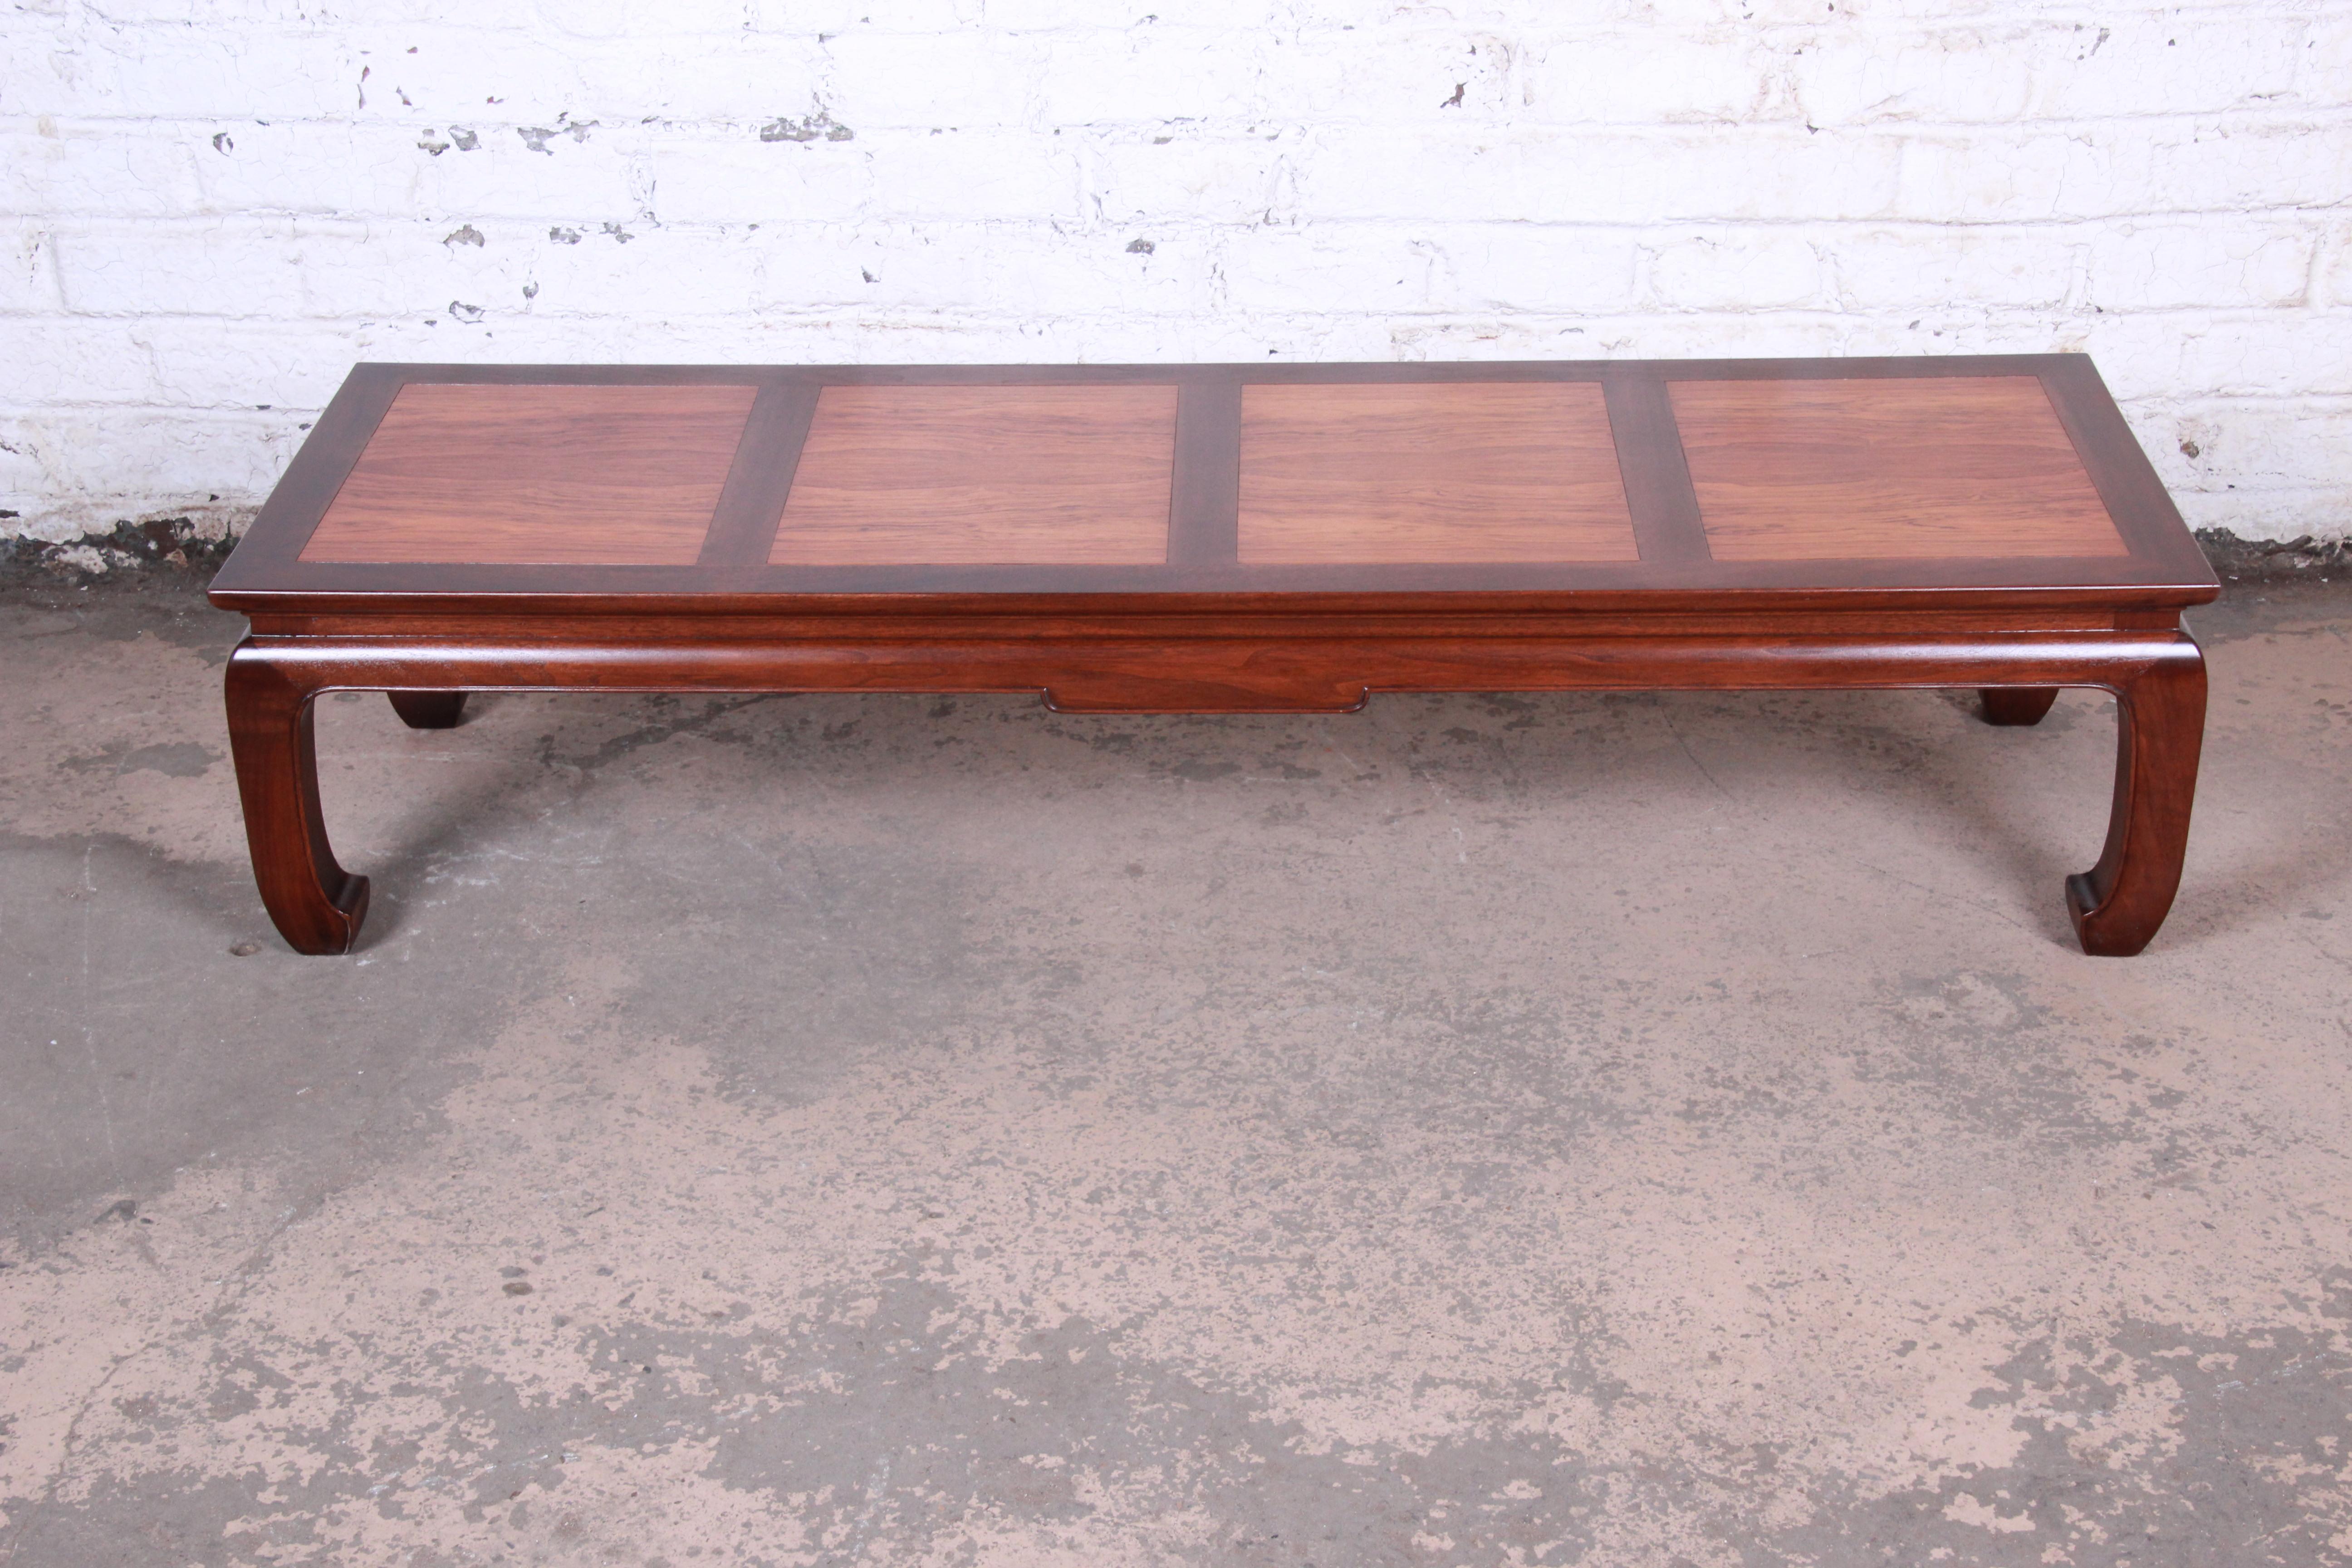 A gorgeous Mid-Century Modern Hollywood Regency chinoiserie coffee or cocktail table

Designed by Michael Taylor for the Far East Collection for Baker Furniture

USA, 1960s

Bookmatched rosewood and walnut

Measures: 63.25